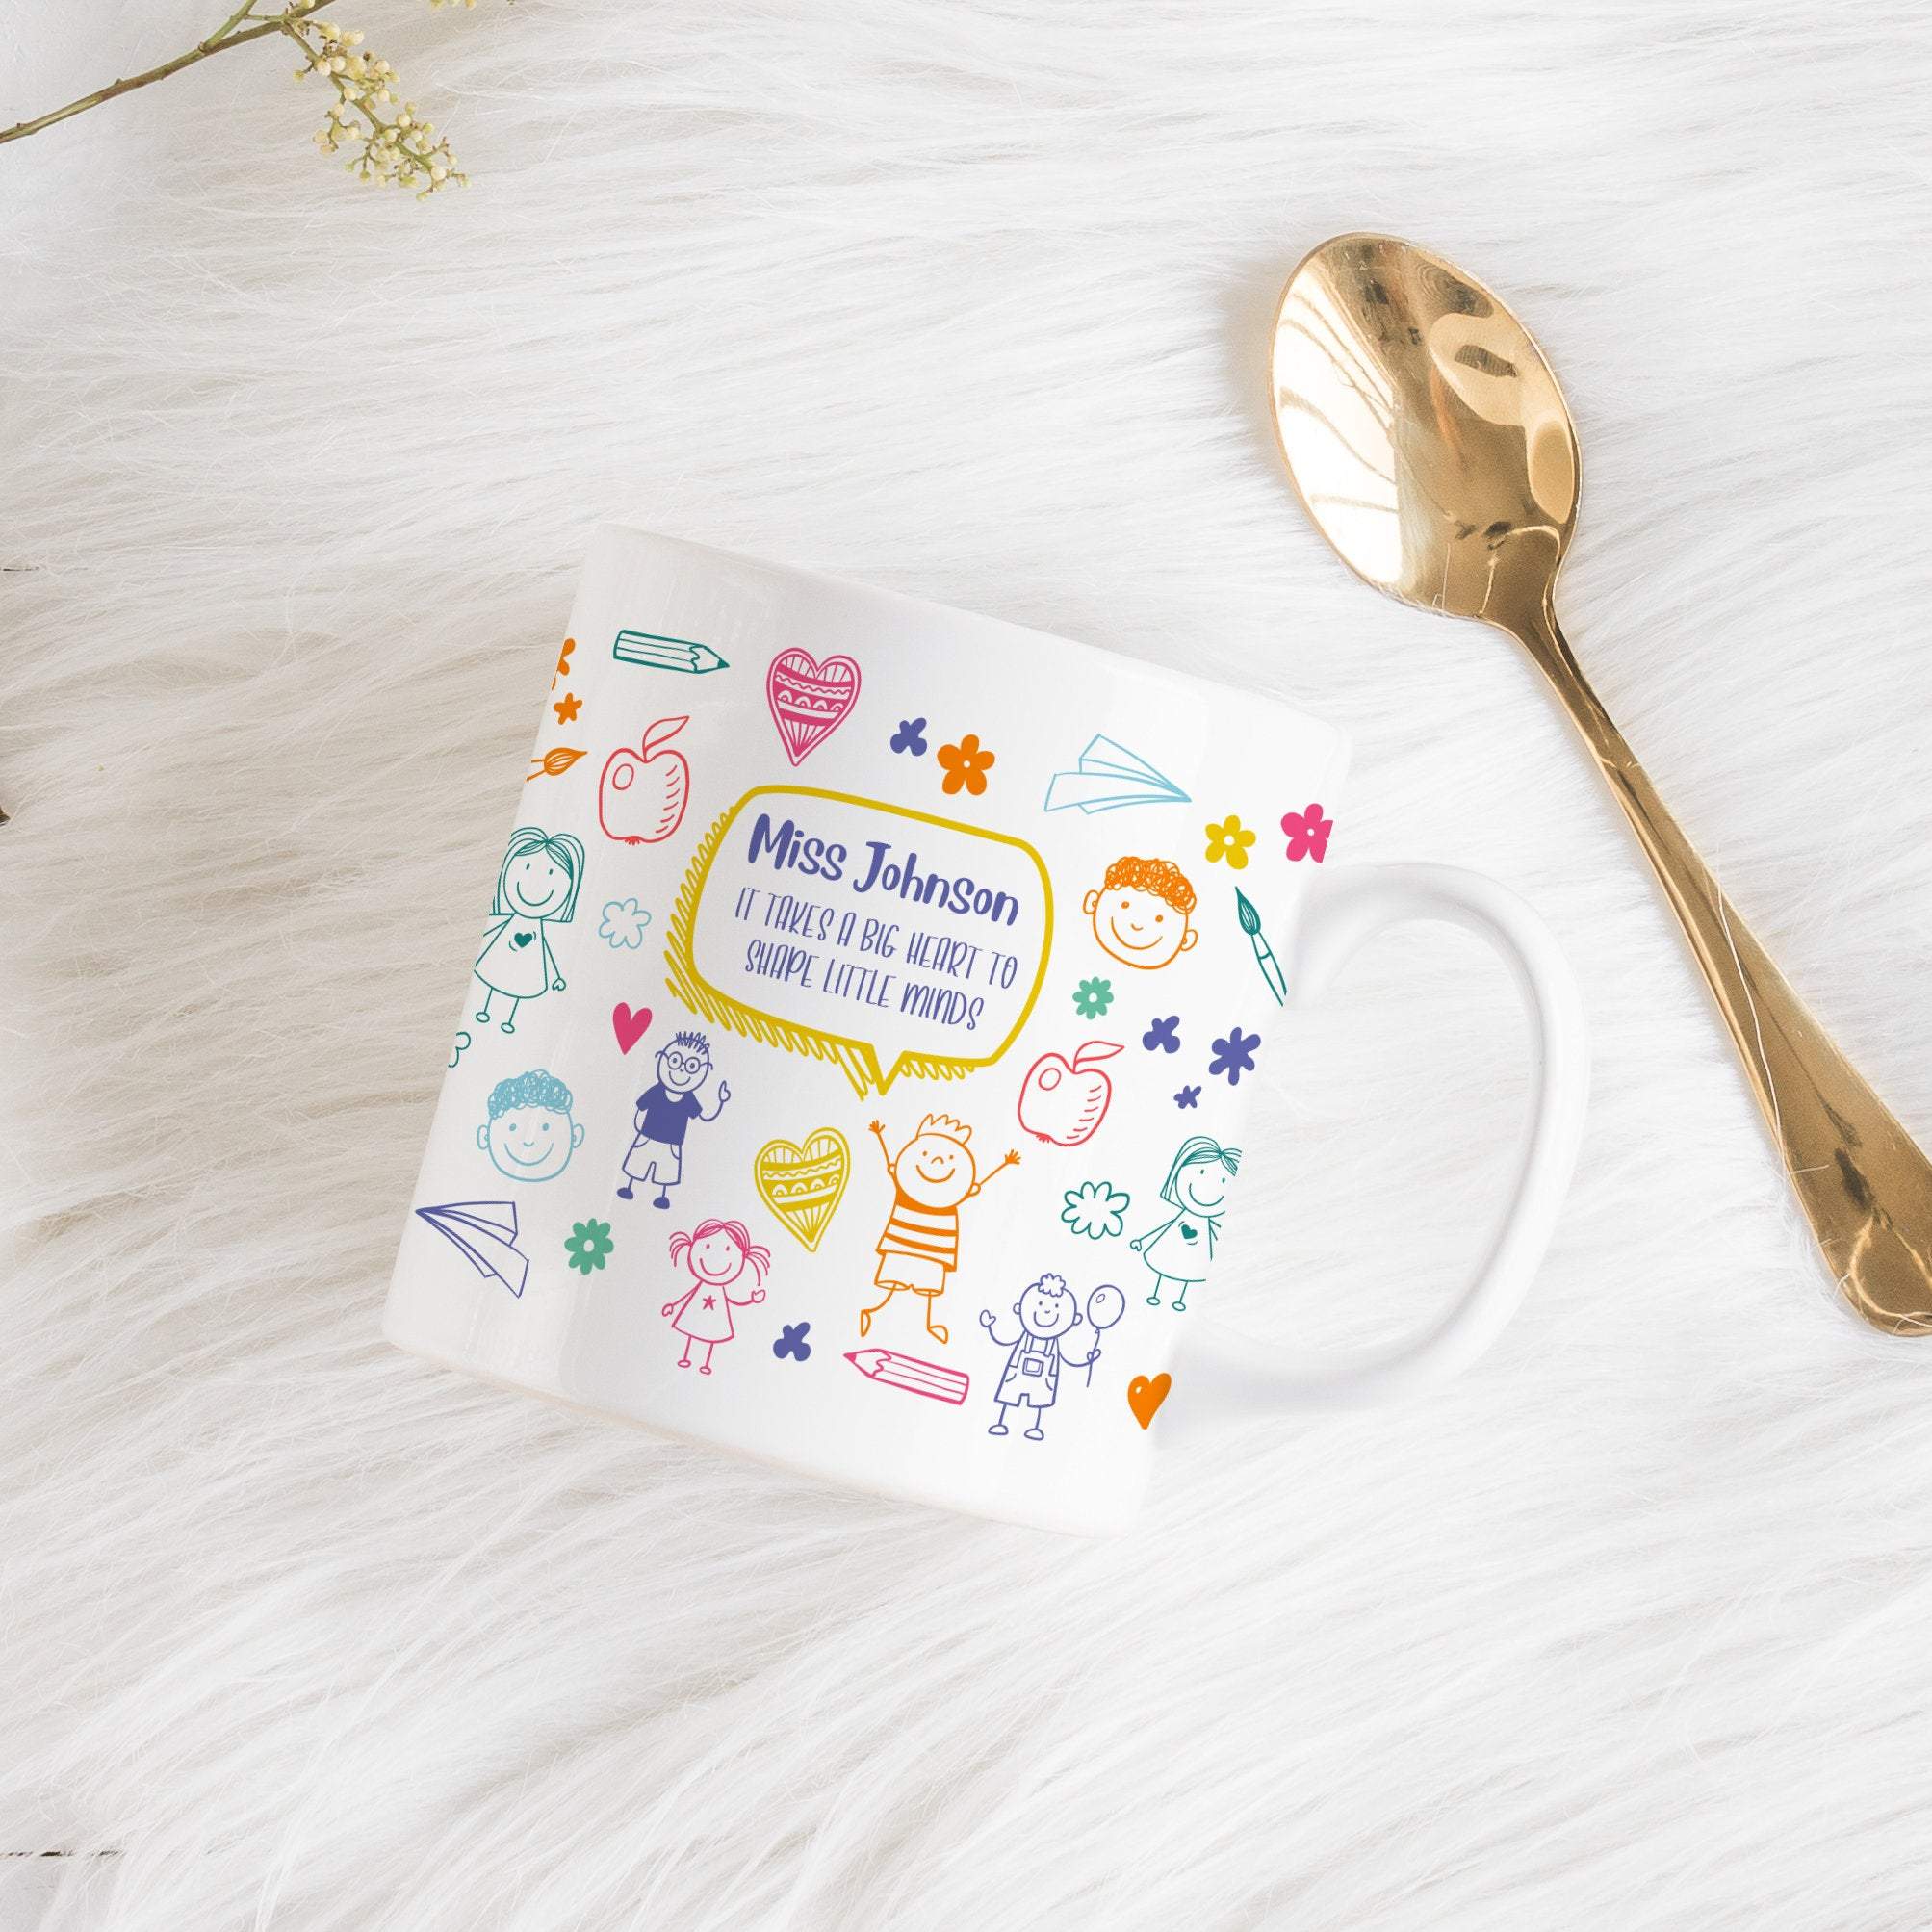 Personalised teacher thank you gift, Teacher mug with name, Teacher Appreciation Gifts